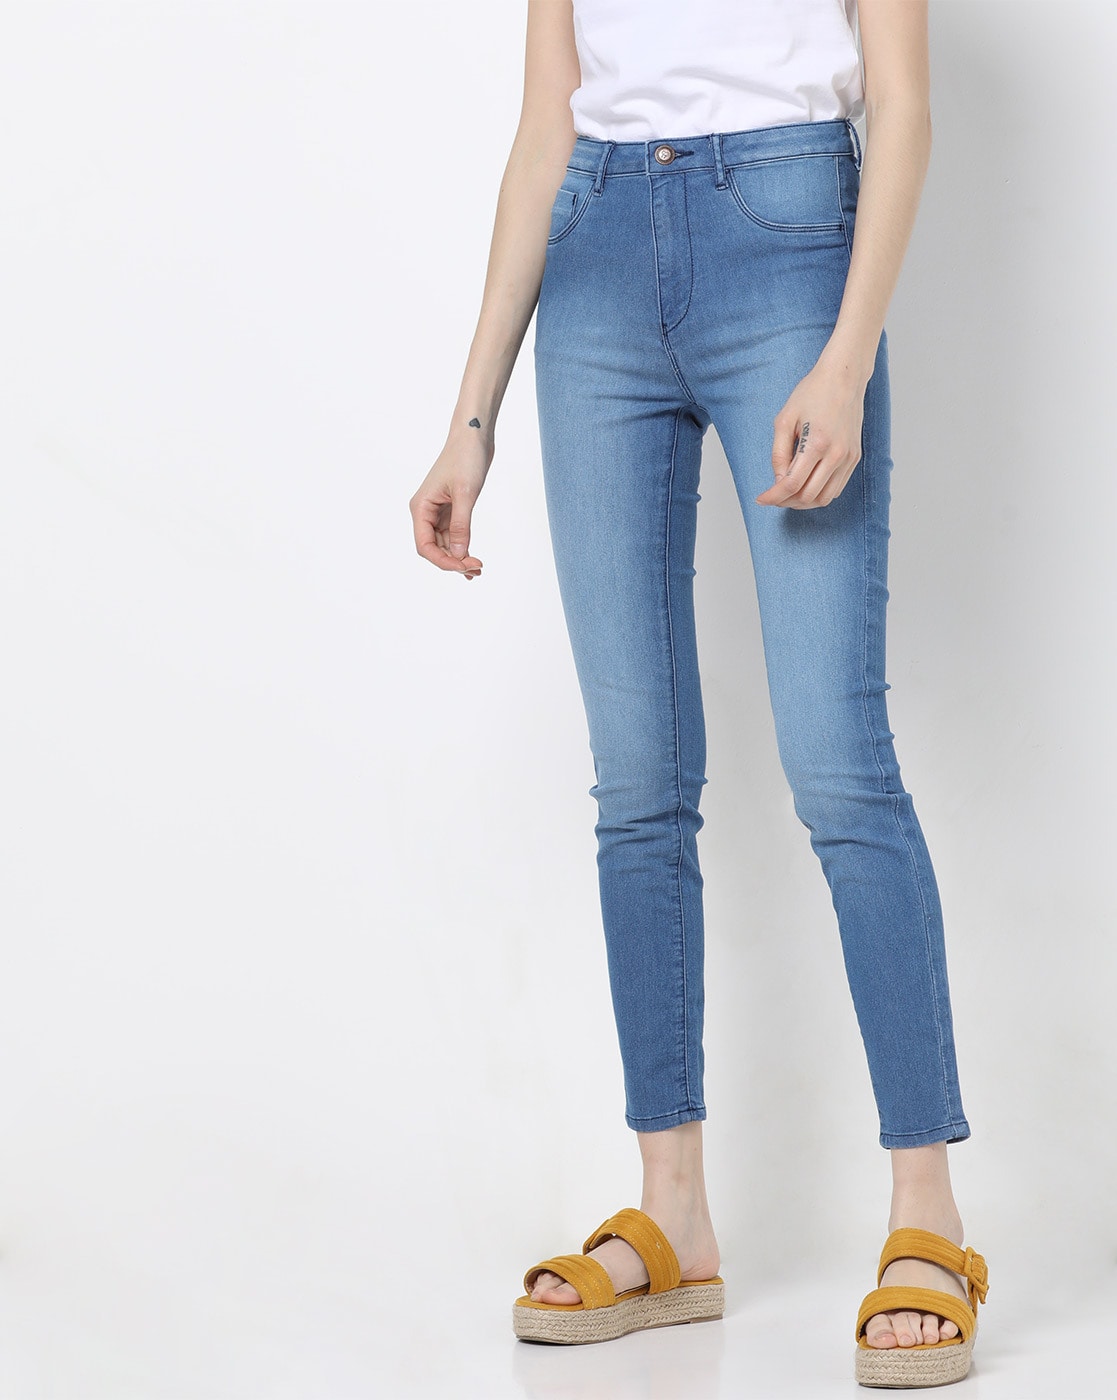 flying machine jeans for ladies